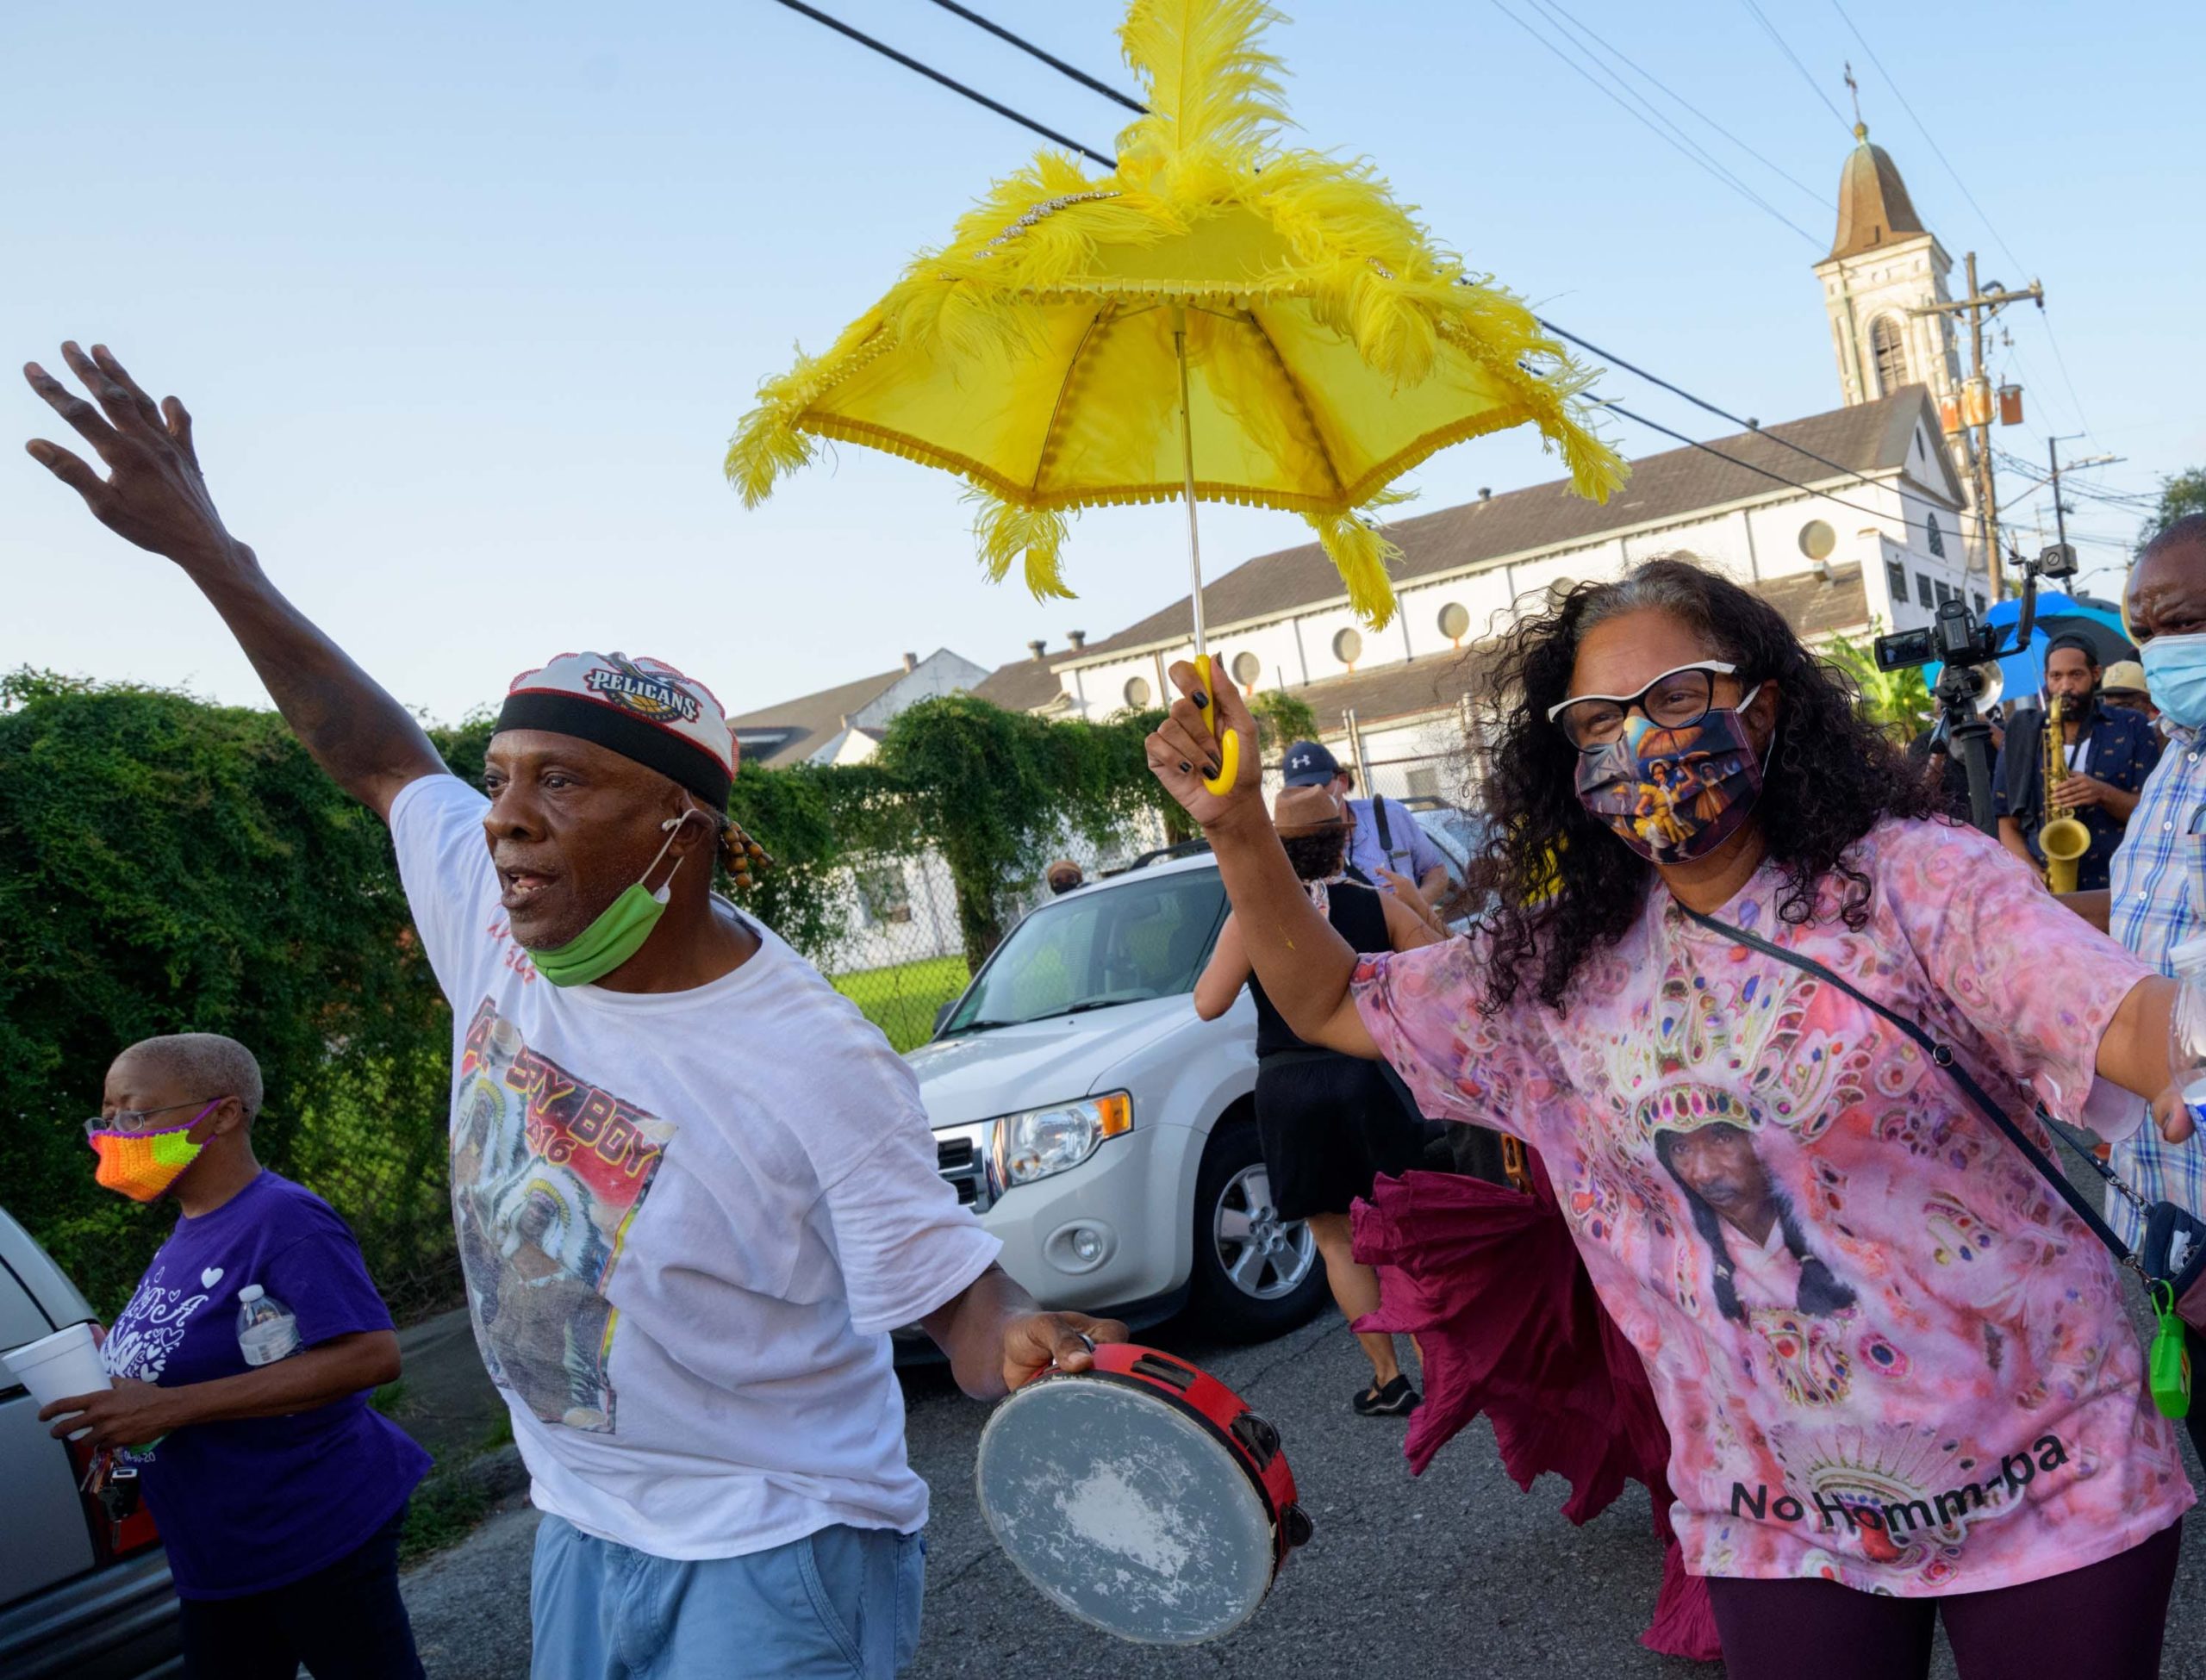 Spirit of FiYiYi spy boy Albert Polite, right, and baby doll Dianne Honore Destrehan, right, celebrate the life of Sylvester Hawk Francis at the Backstreet Cultural Museum next to the St Augustine Catholic Church in the Treme Neighborhood of New Orleans, Tuesday after Francis passed from a long illness.
Photo by Matthew Hinton